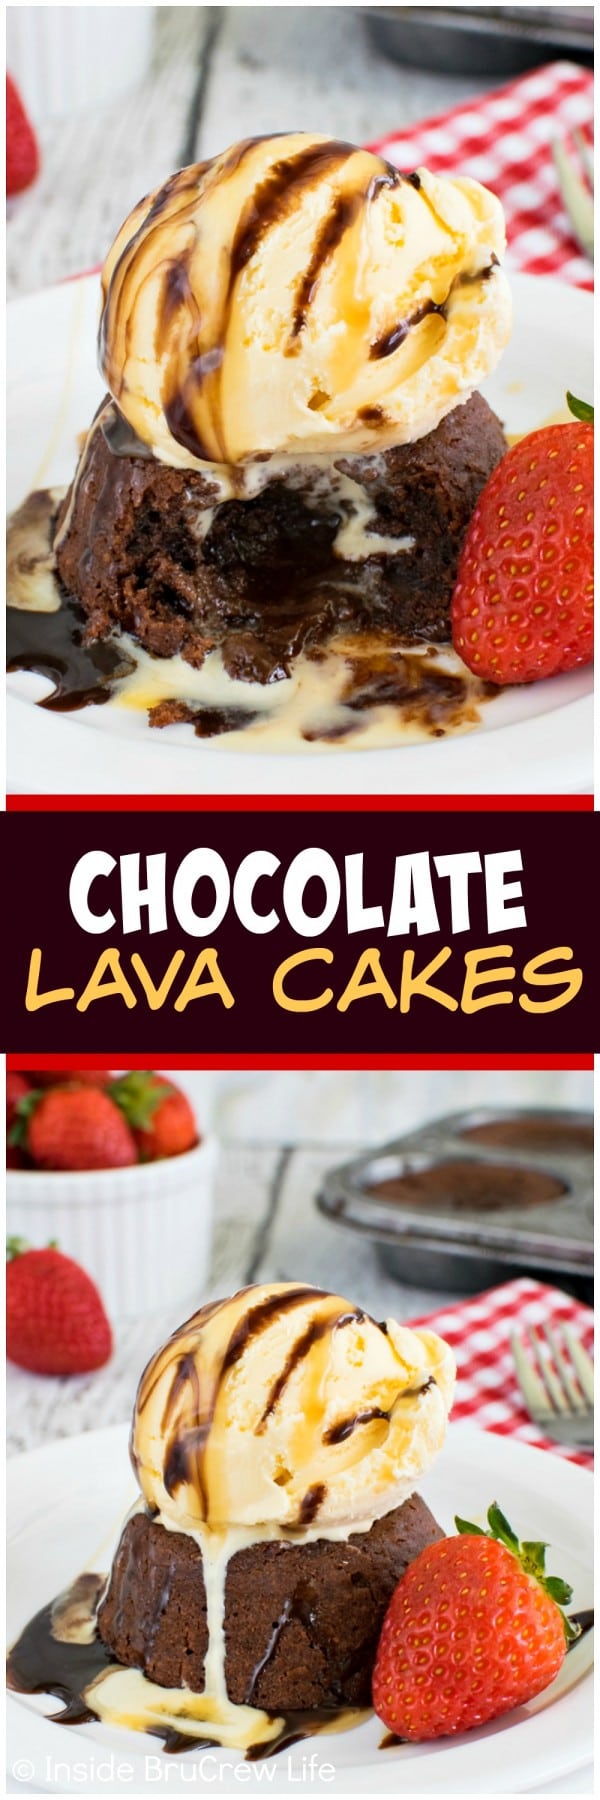 Chocolate Lava Cakes - a gooey center makes these little cakes such a decadent recipe. Great dessert when topped with ice cream!